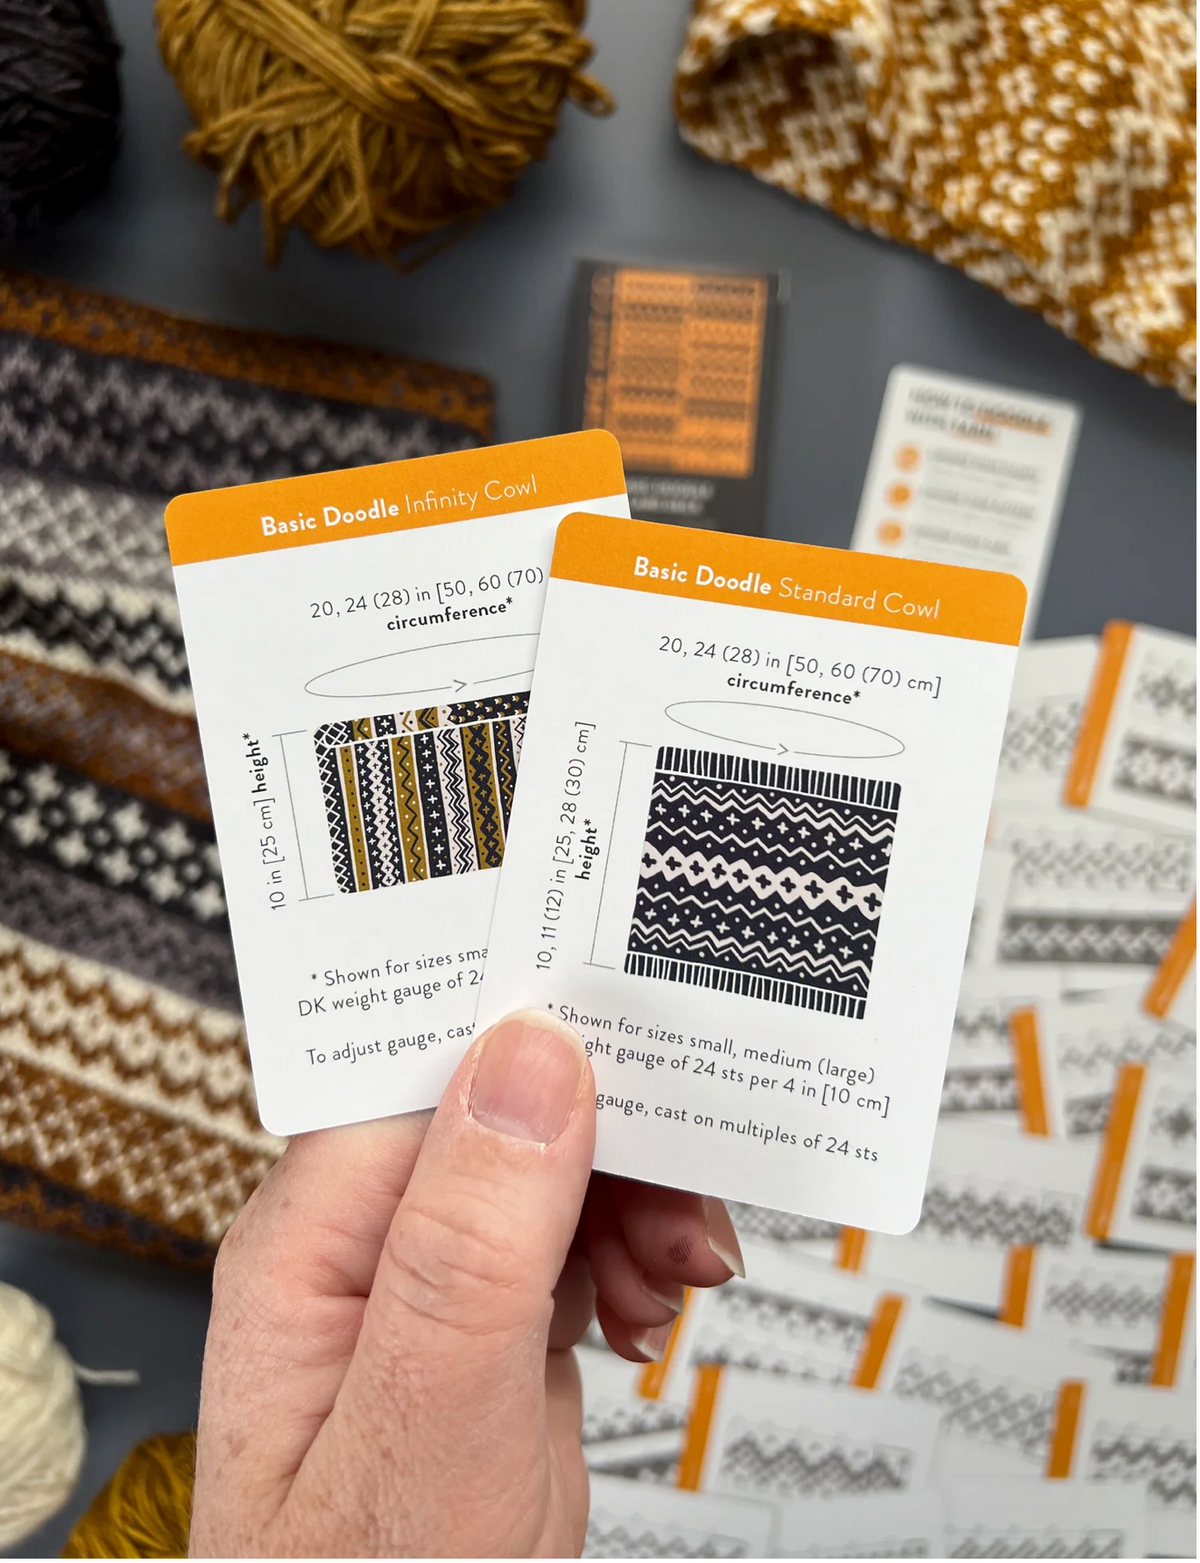 Pacific Knit Co - Basic Doodle Card Deck - YourNextKnit